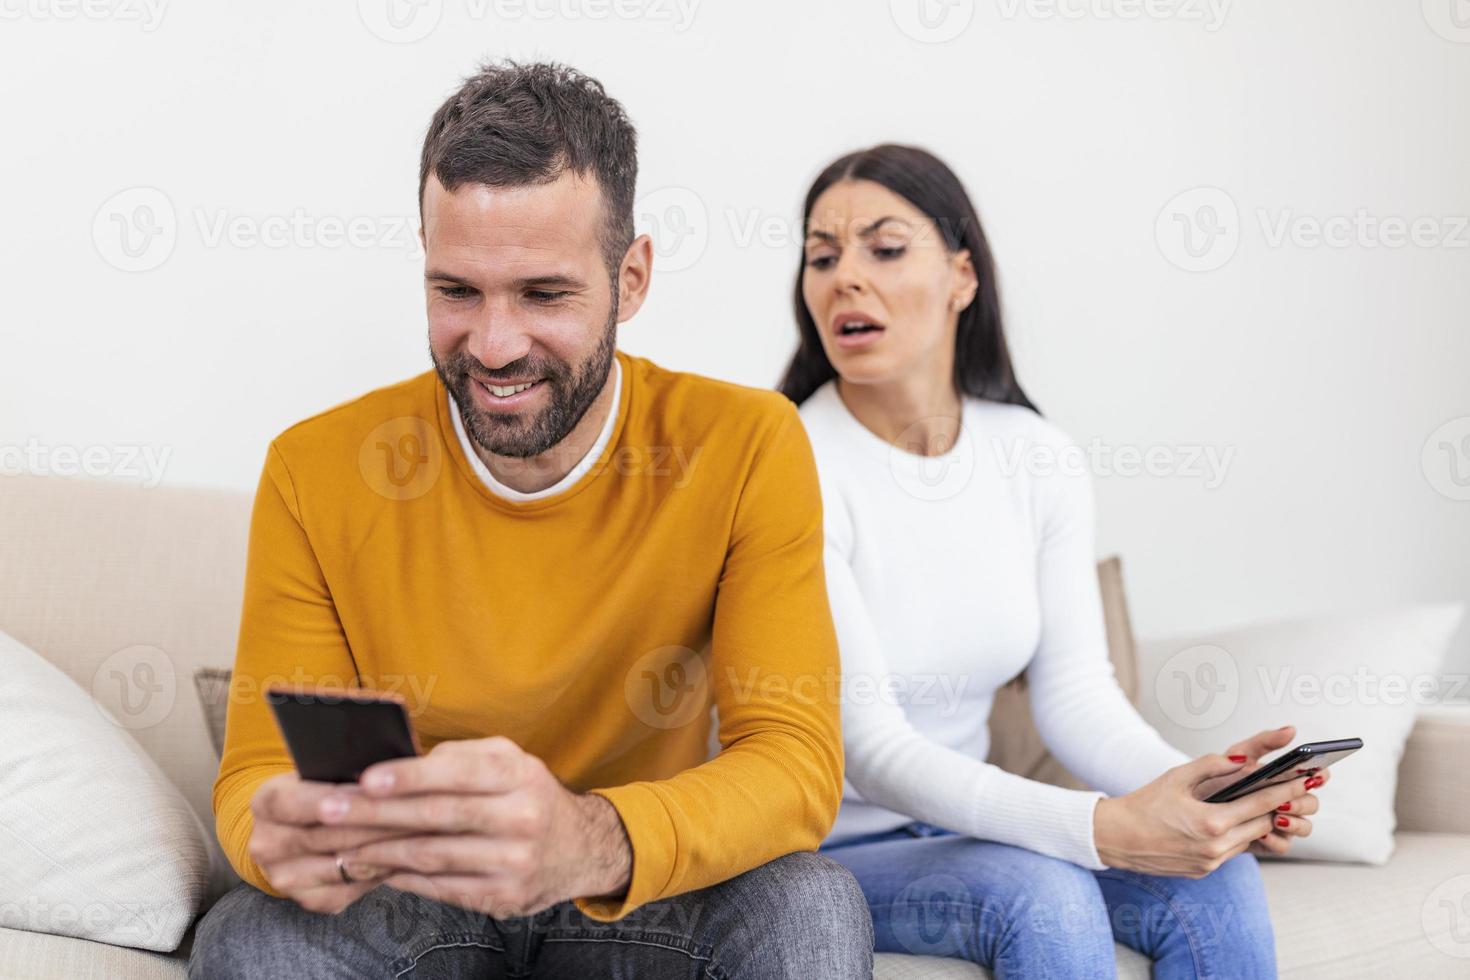 happy smiling man turned his back to wife, reading message on phone from his lover, worried woman sitting next to him, trying to peek at screen. Cheating and infidelity concept photo